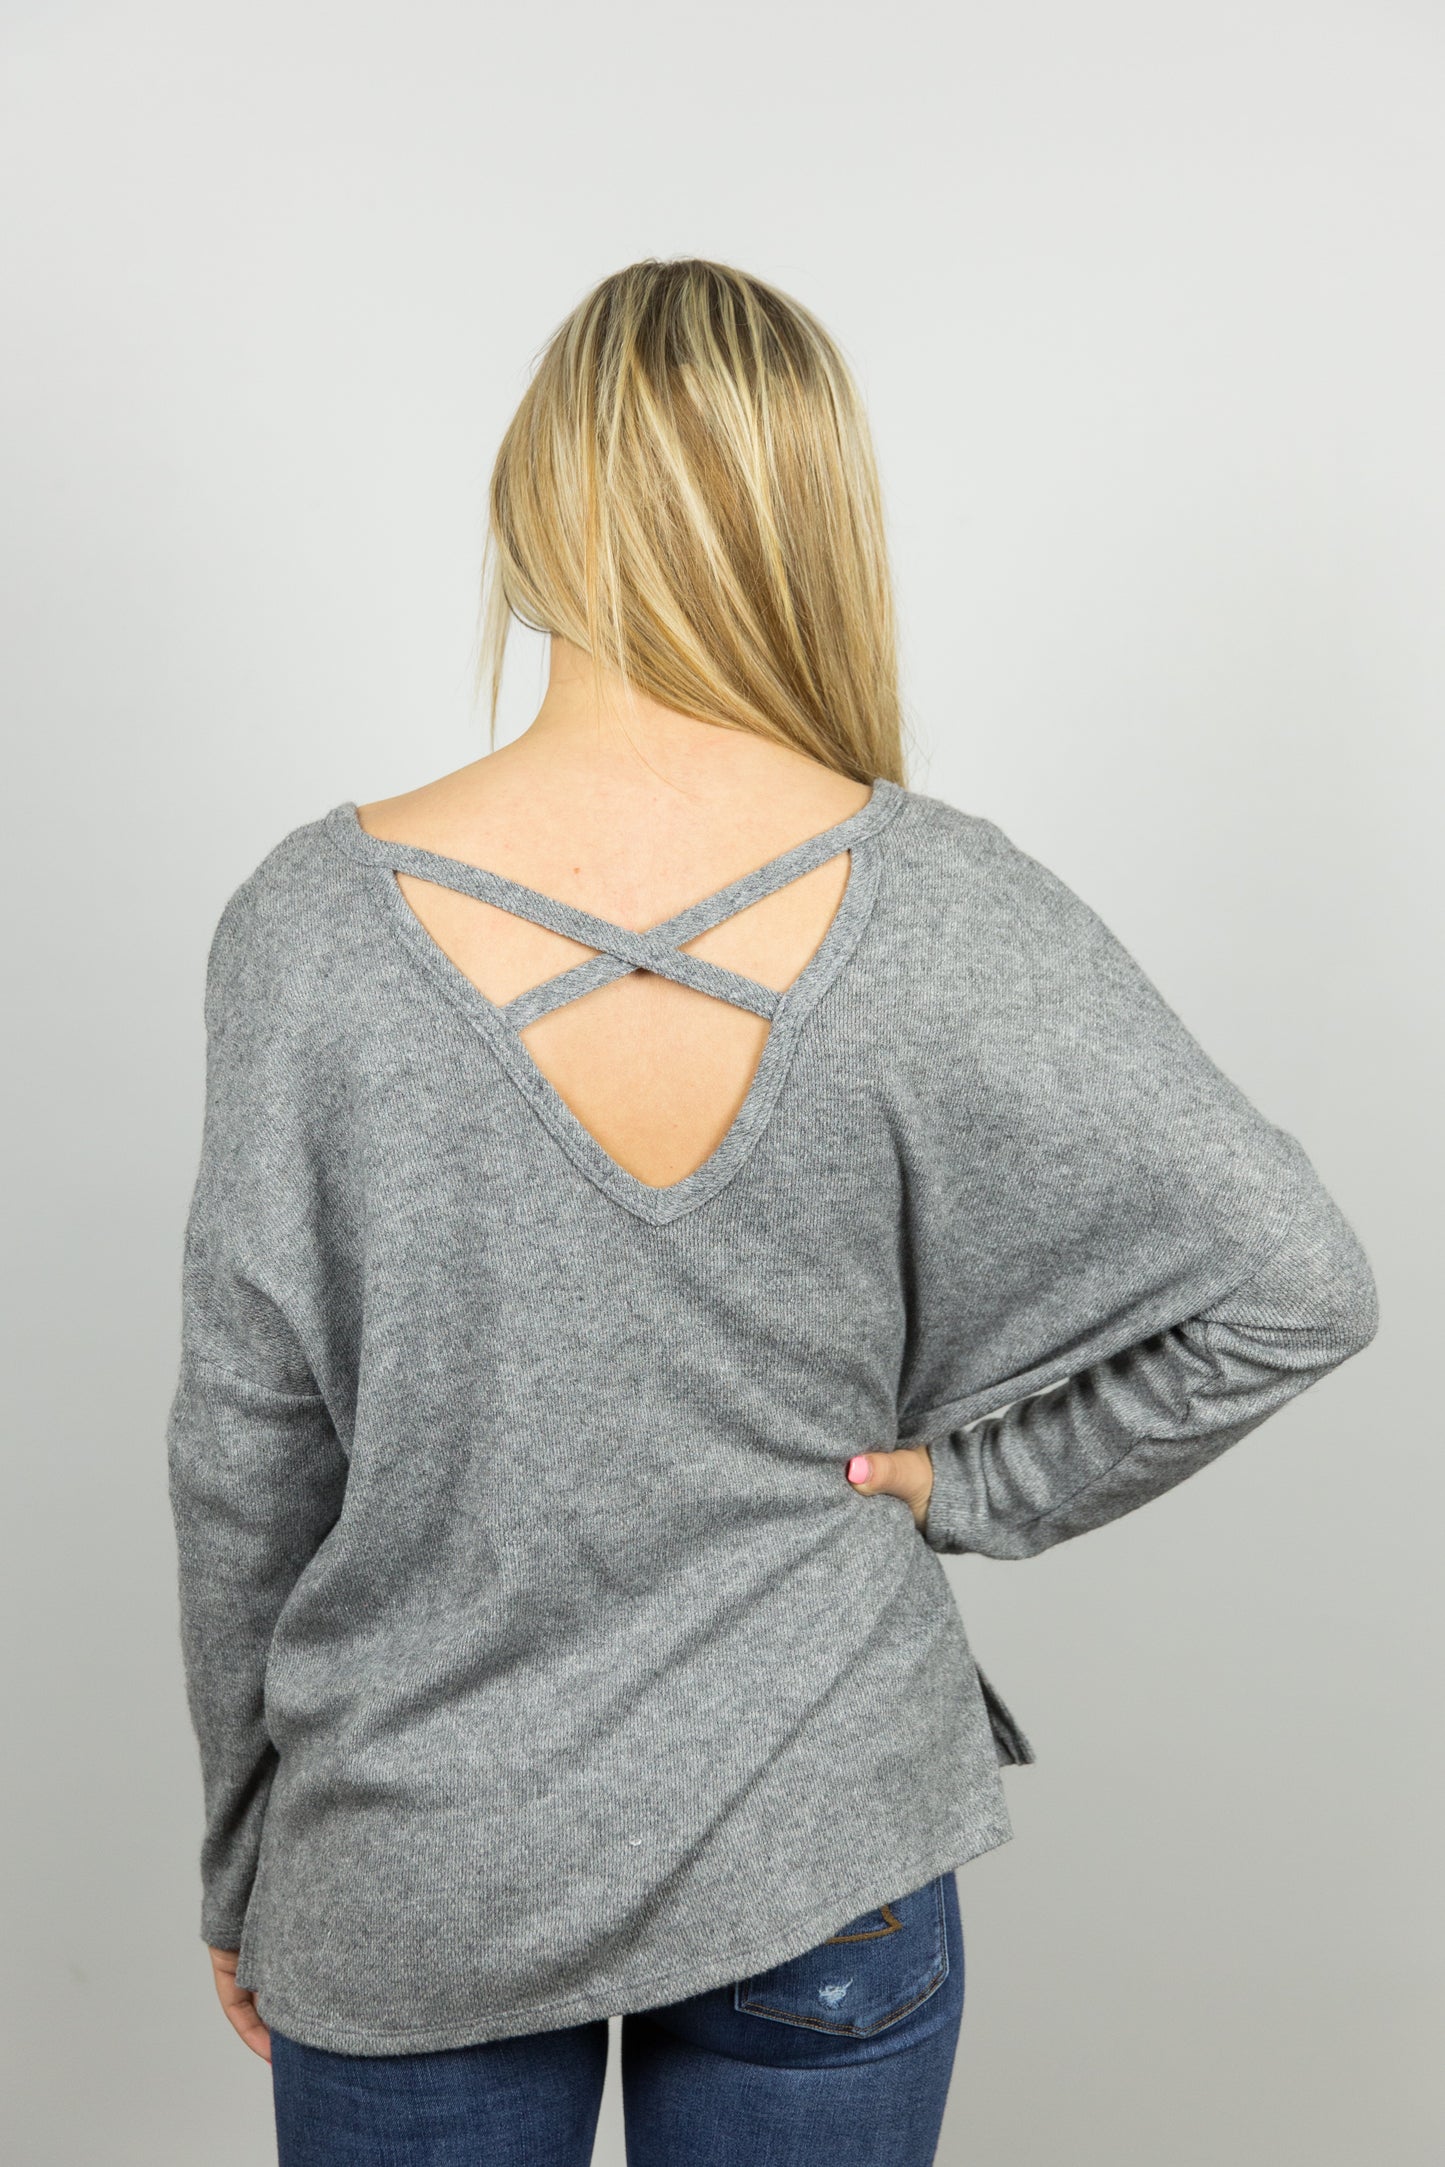 Blue Criss Cross Front and Back Top